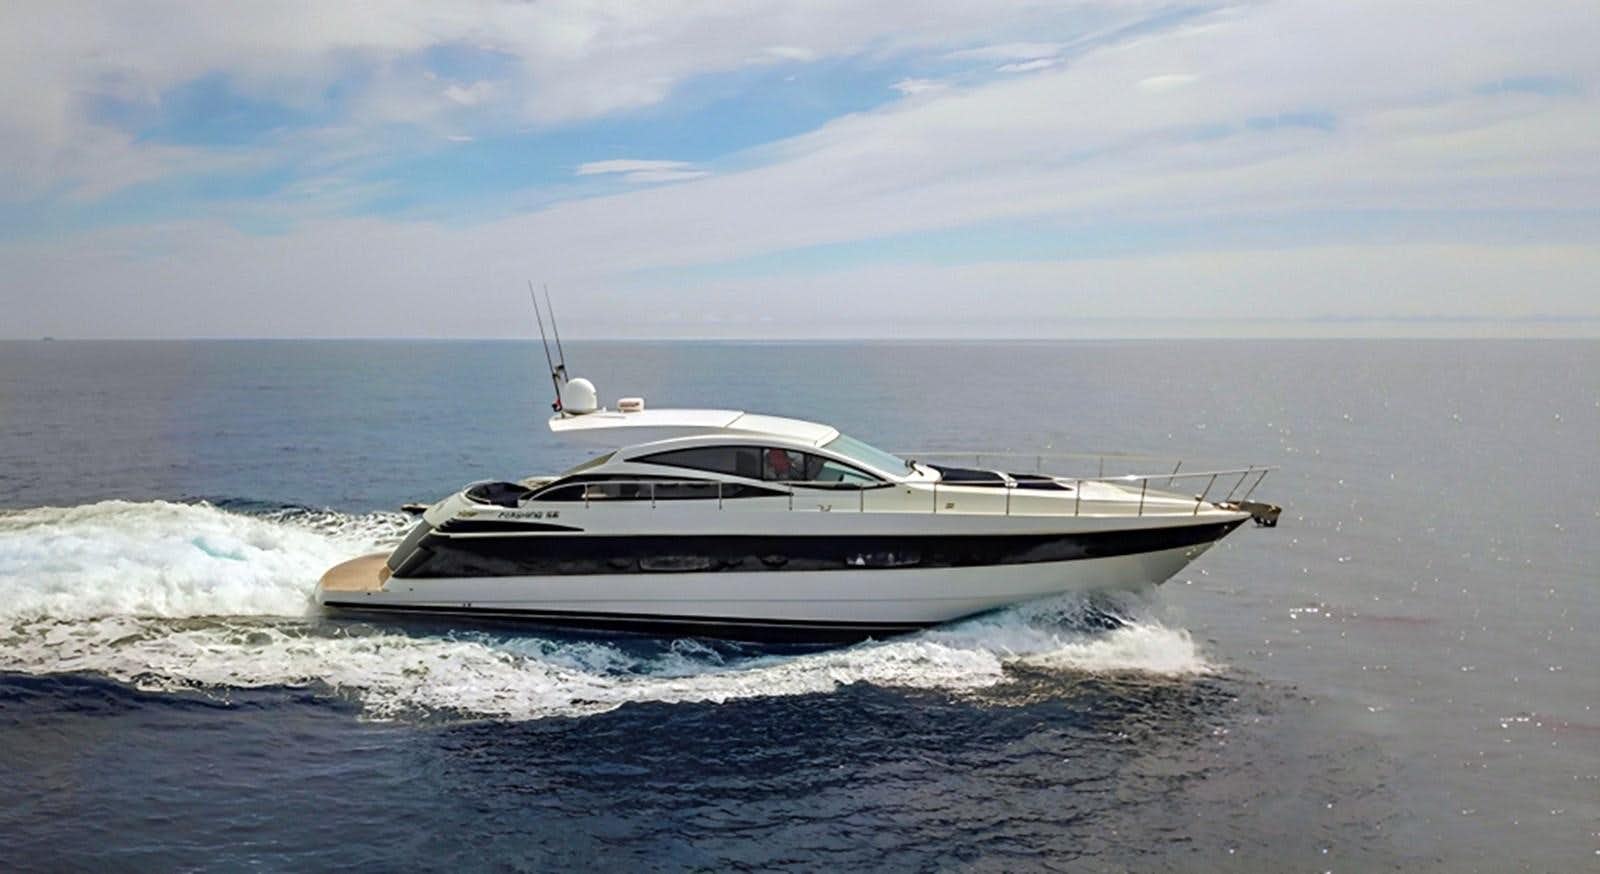 Pershing 56
Yacht for Sale